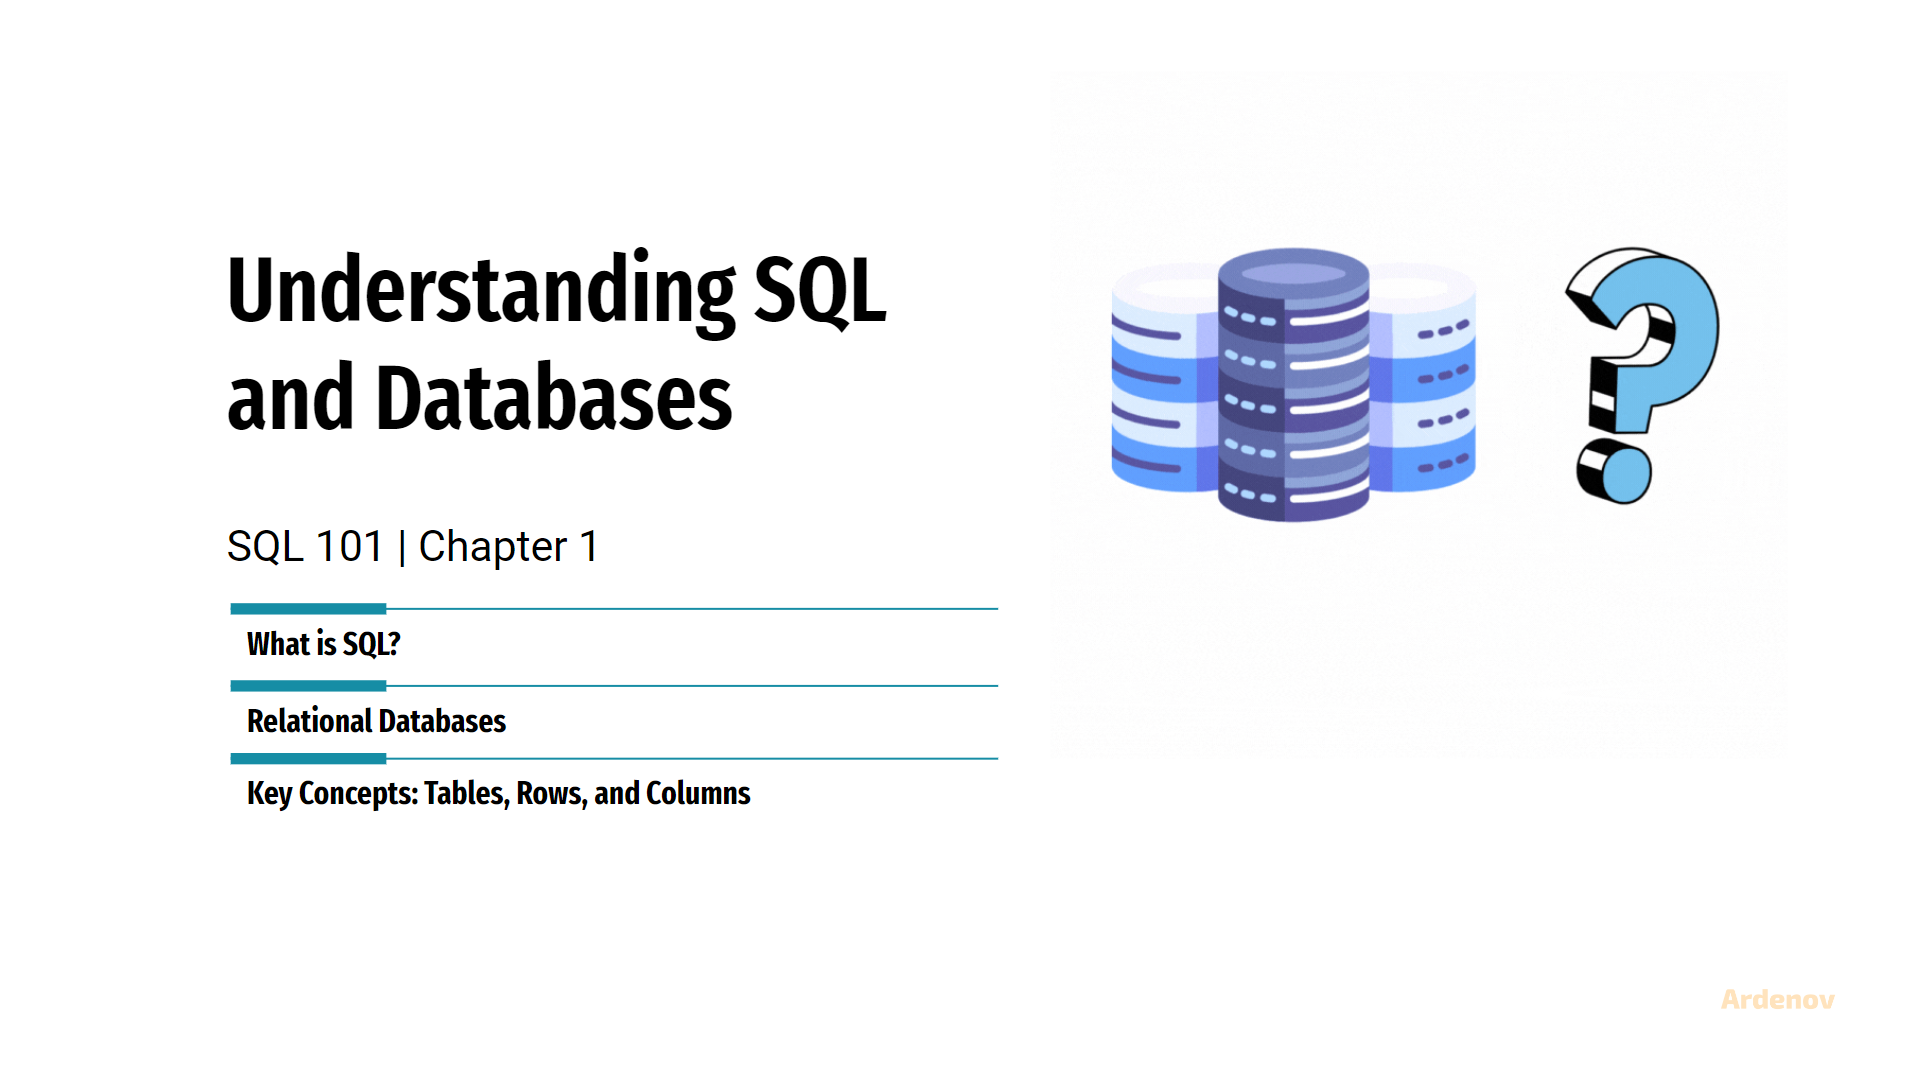 SQL 101 | Chapter 1: Understanding SQL and Databases